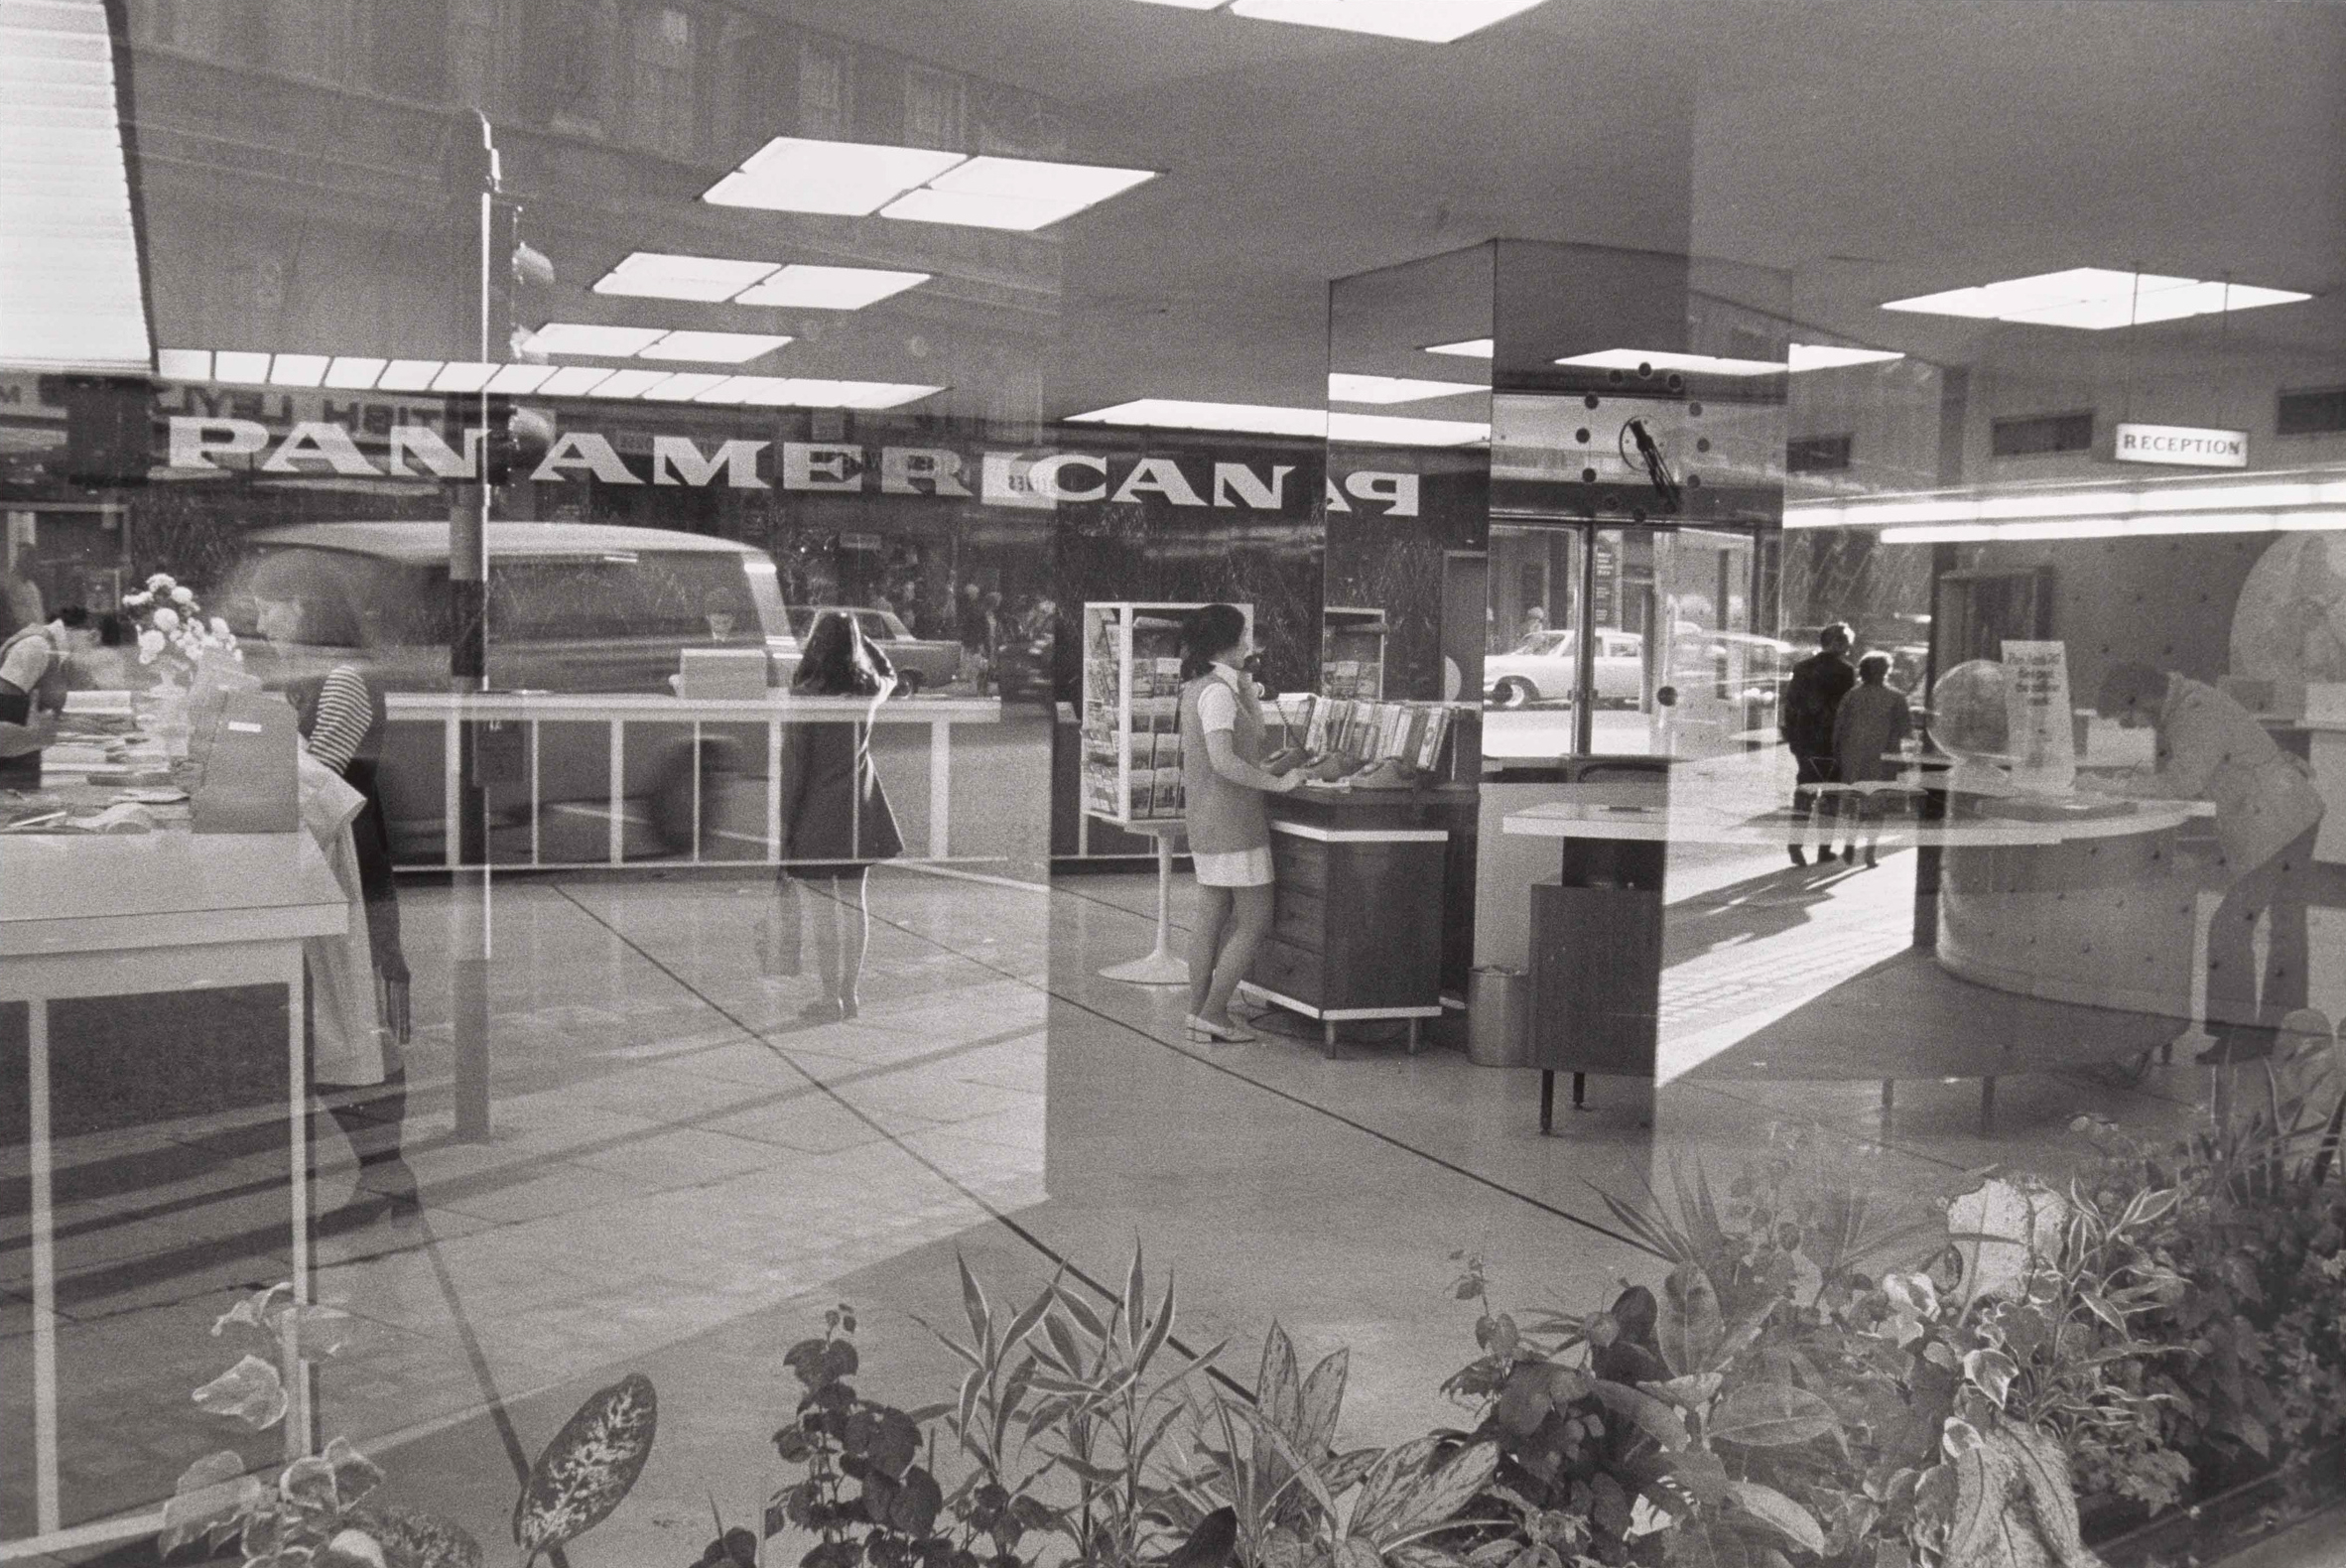 Ian Wallace, Pan Am Scan, (detail), 1970. Gelatin silver print, 40 x 60.1 cm. Art Gallery of Ontario, Gift of Sandra Simpson, 2017. © Ian Wallace, courtesy Catriona Jeffries 2017/236.1–.5.